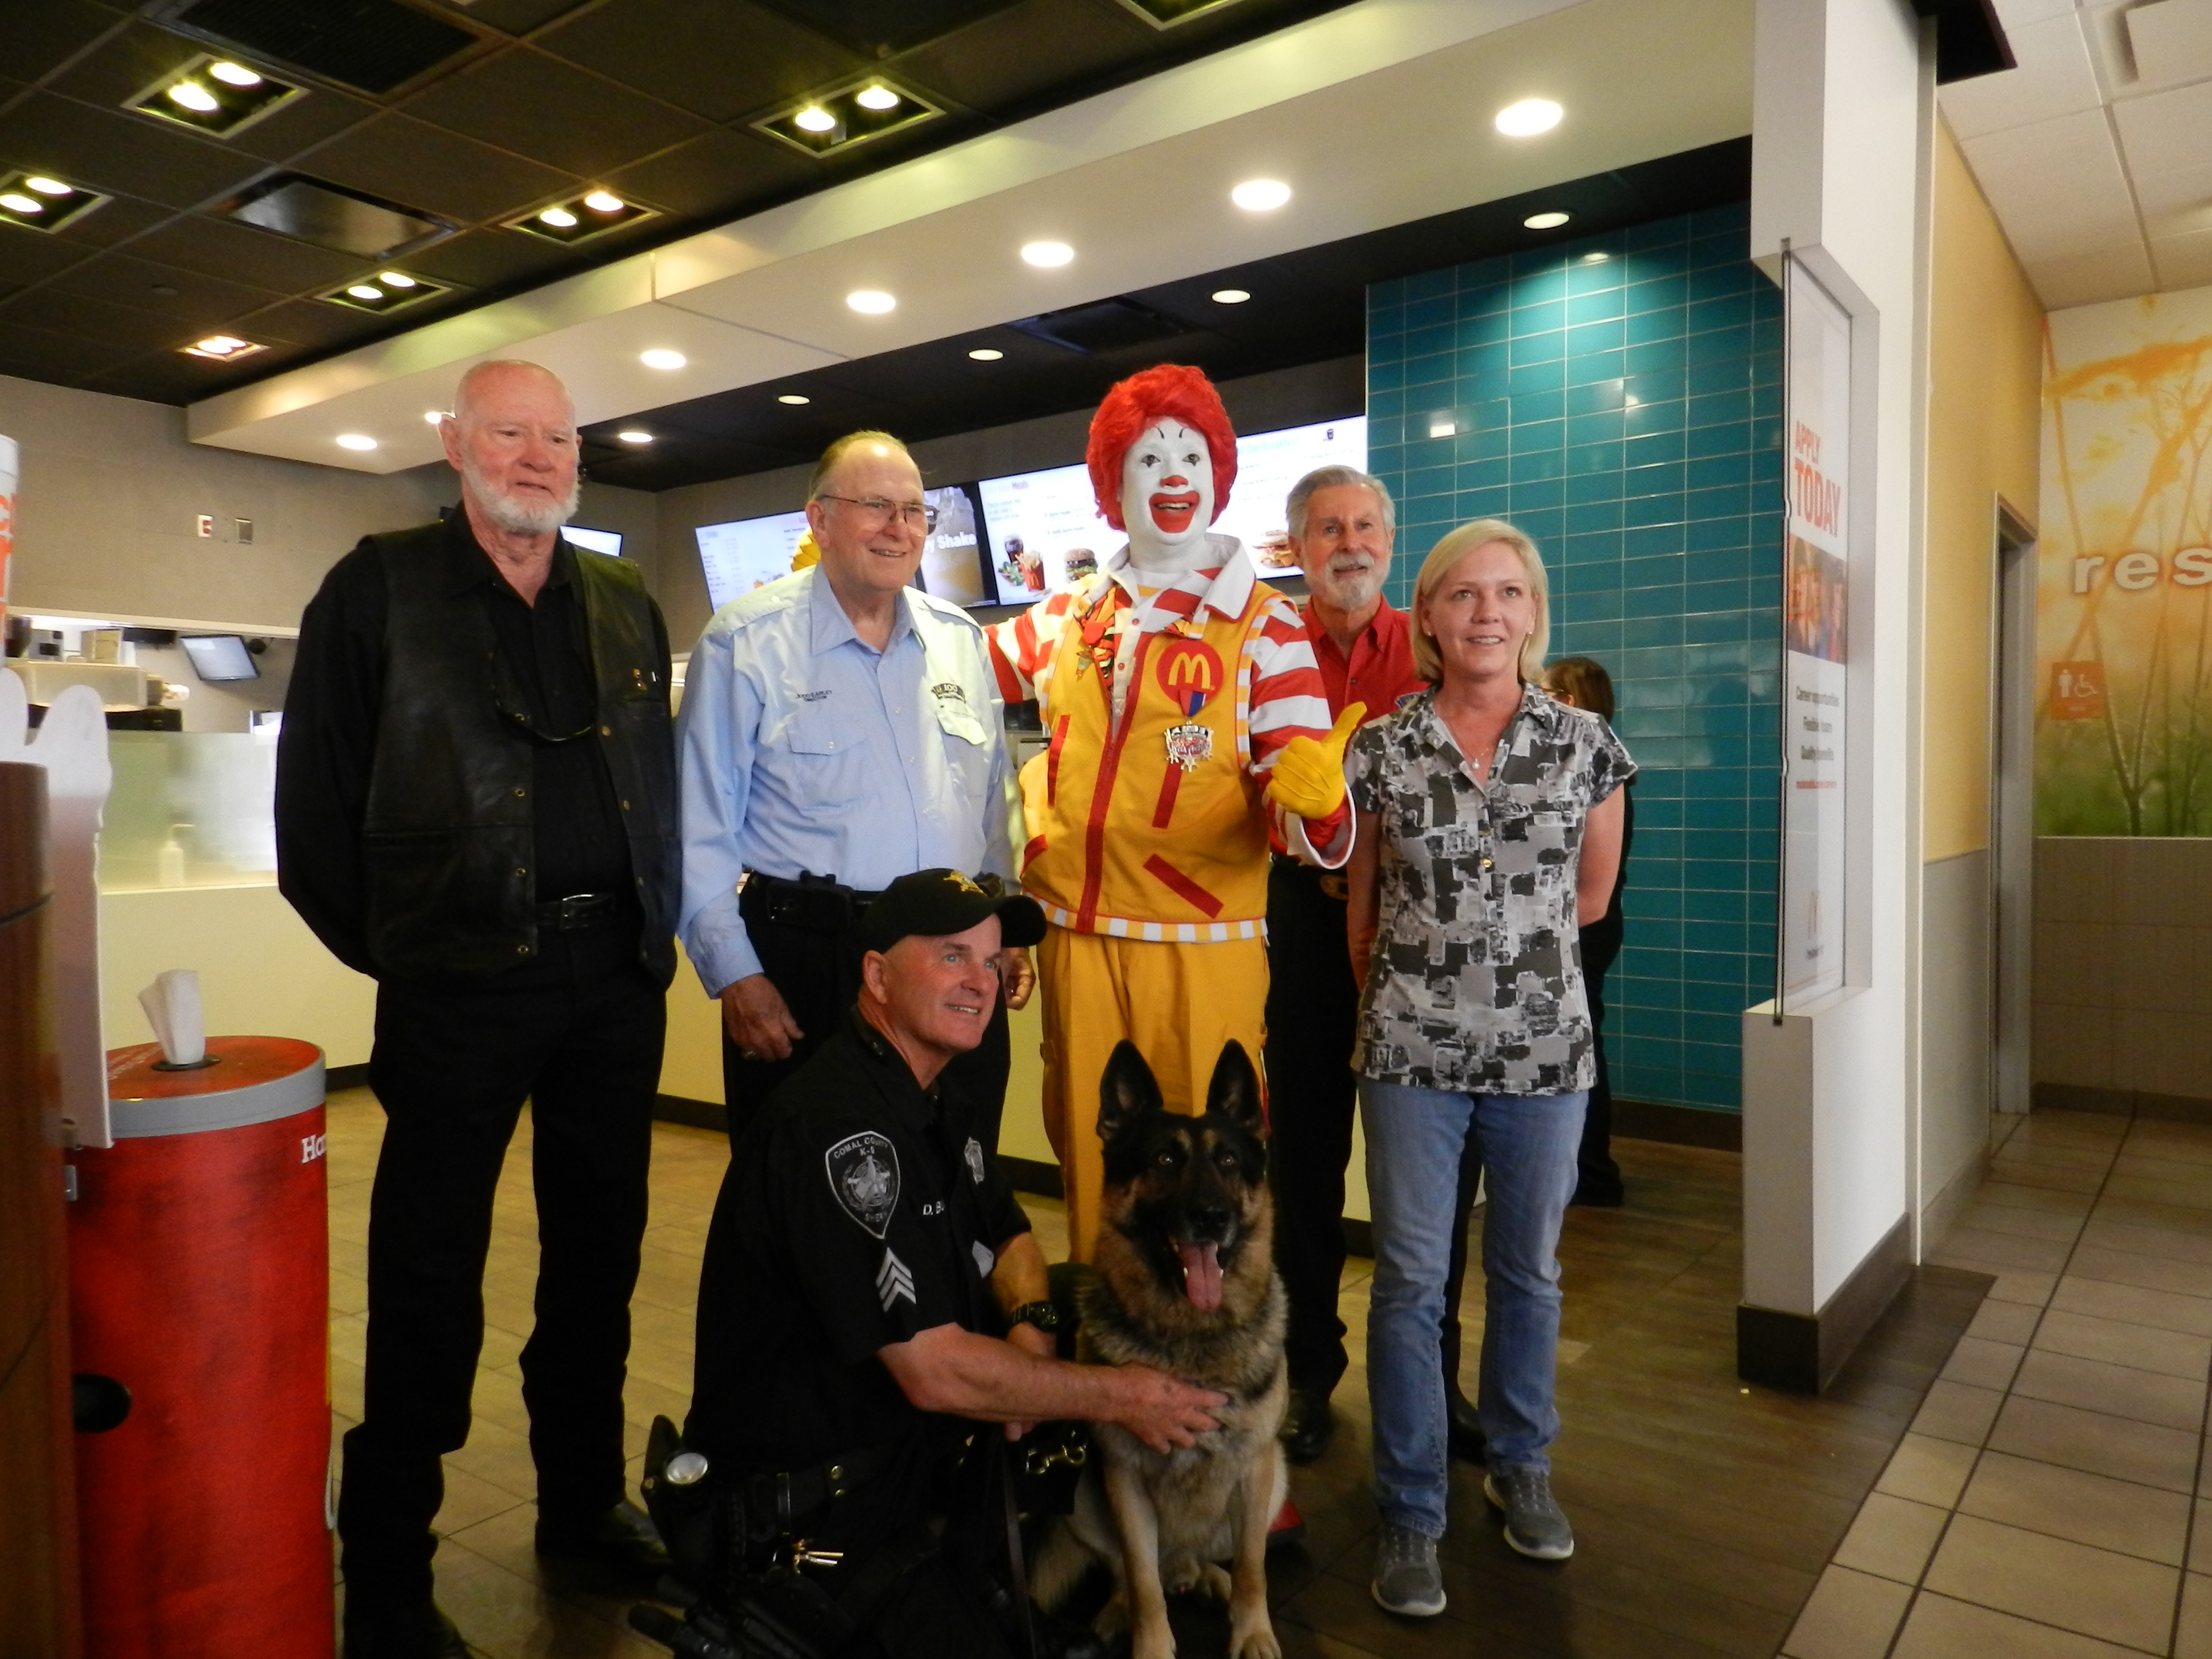 A Big Thank You to McDonald’s and our Comal County Community